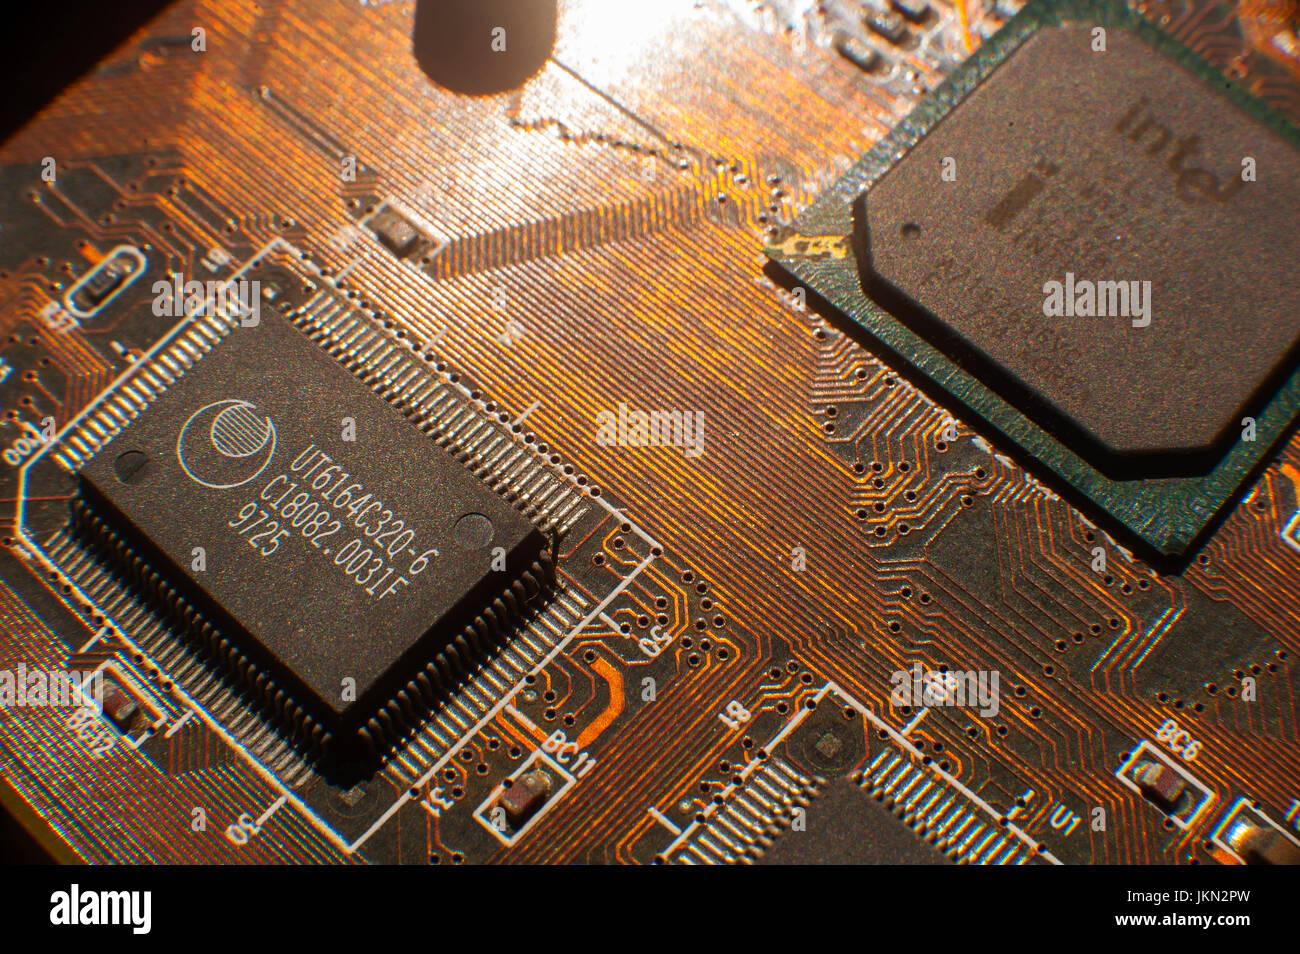 Computer motherboard macro detail circuit components Stock Photo